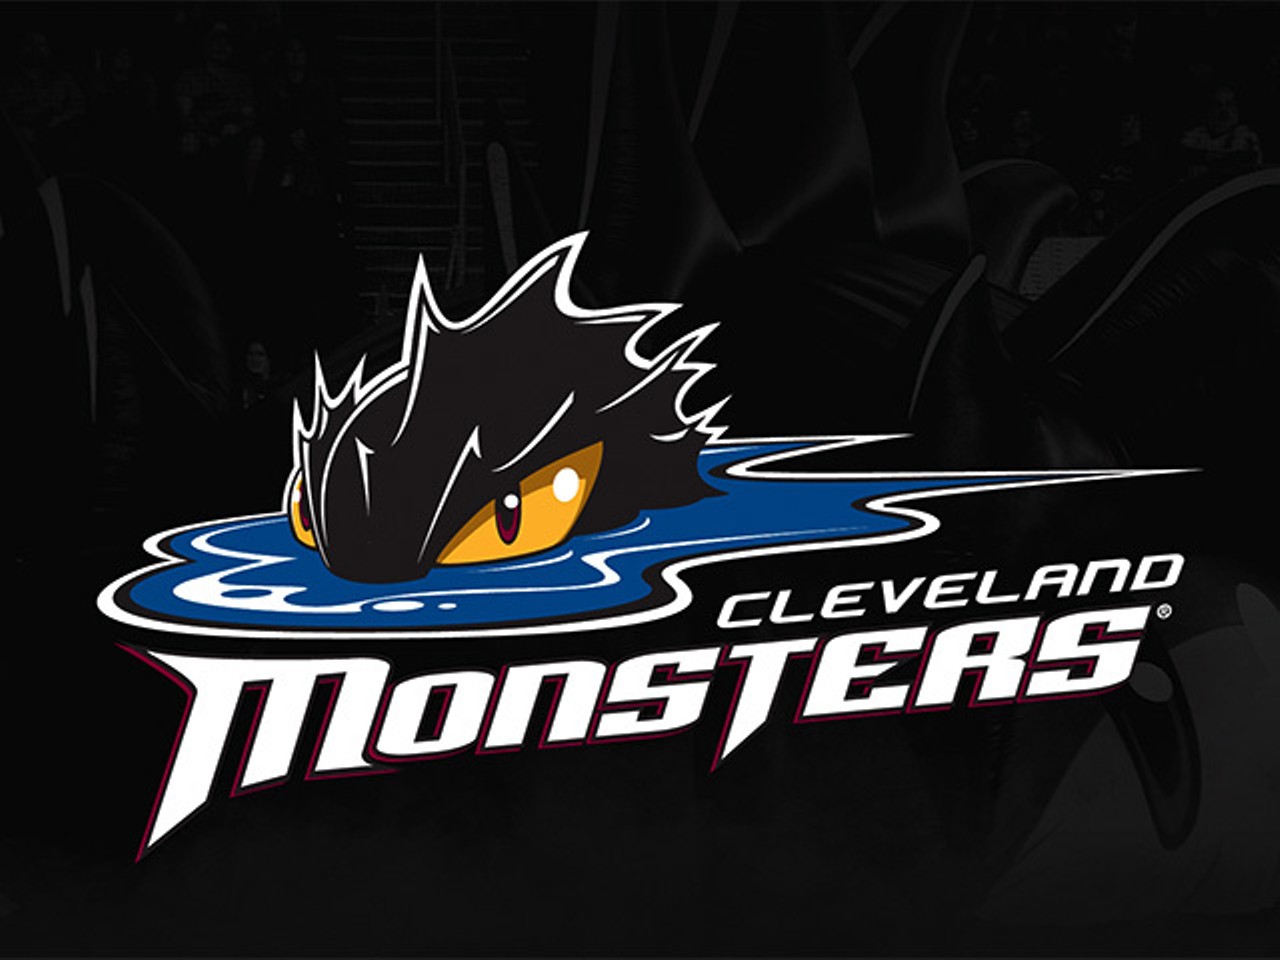 Monsters vs. Chicago Wolves 
When: Fri., Nov. 11
The Cavs NBA title undoubtedly overshadowed the Cleveland Monsters' Calder Cup win, but the AHL team won the hearts of local hockey fans with its lengthy playoff run that culminated in a championship win. Tonight at 7, the team battles the Chicago Wolves. The two teams face off again tomorrow at 7 p.m. As part of 1-2-3 Fridays, there will be $1 Pepsi products, $2 Sugardale hot dogs and $3 beers at tonight's game. In addition, the team will offer a complimentary ticket to anyone with a valid military ID. At tomorrow night's game, the first 3500 kids will receive a Monsters Superhero Cape.